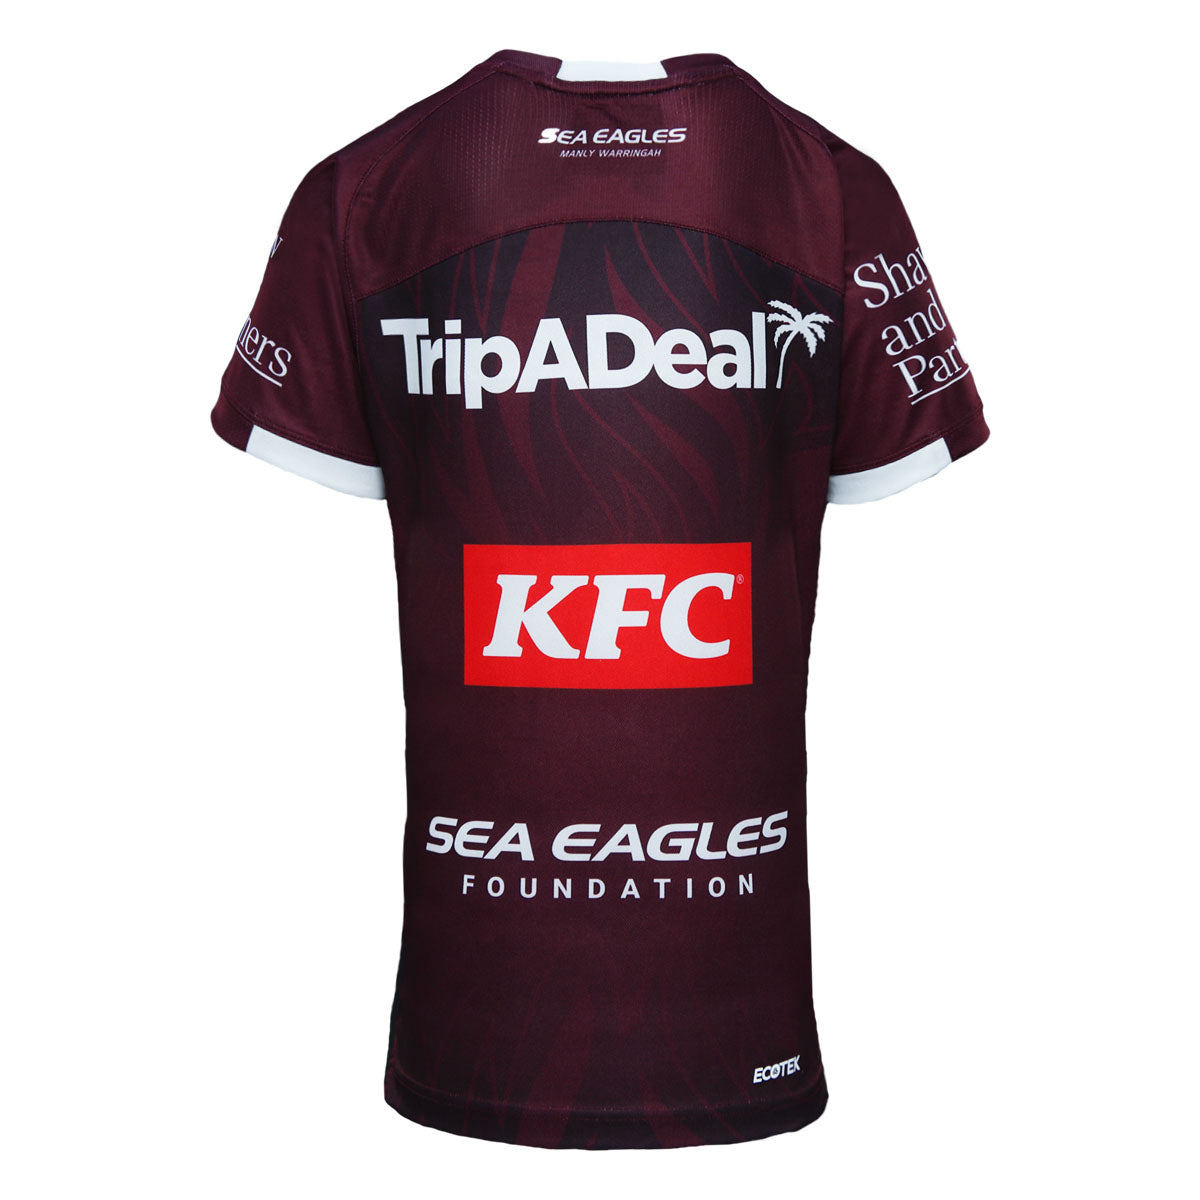 Manly-Warringah Sea Eagles 2024 Youth Training Tee